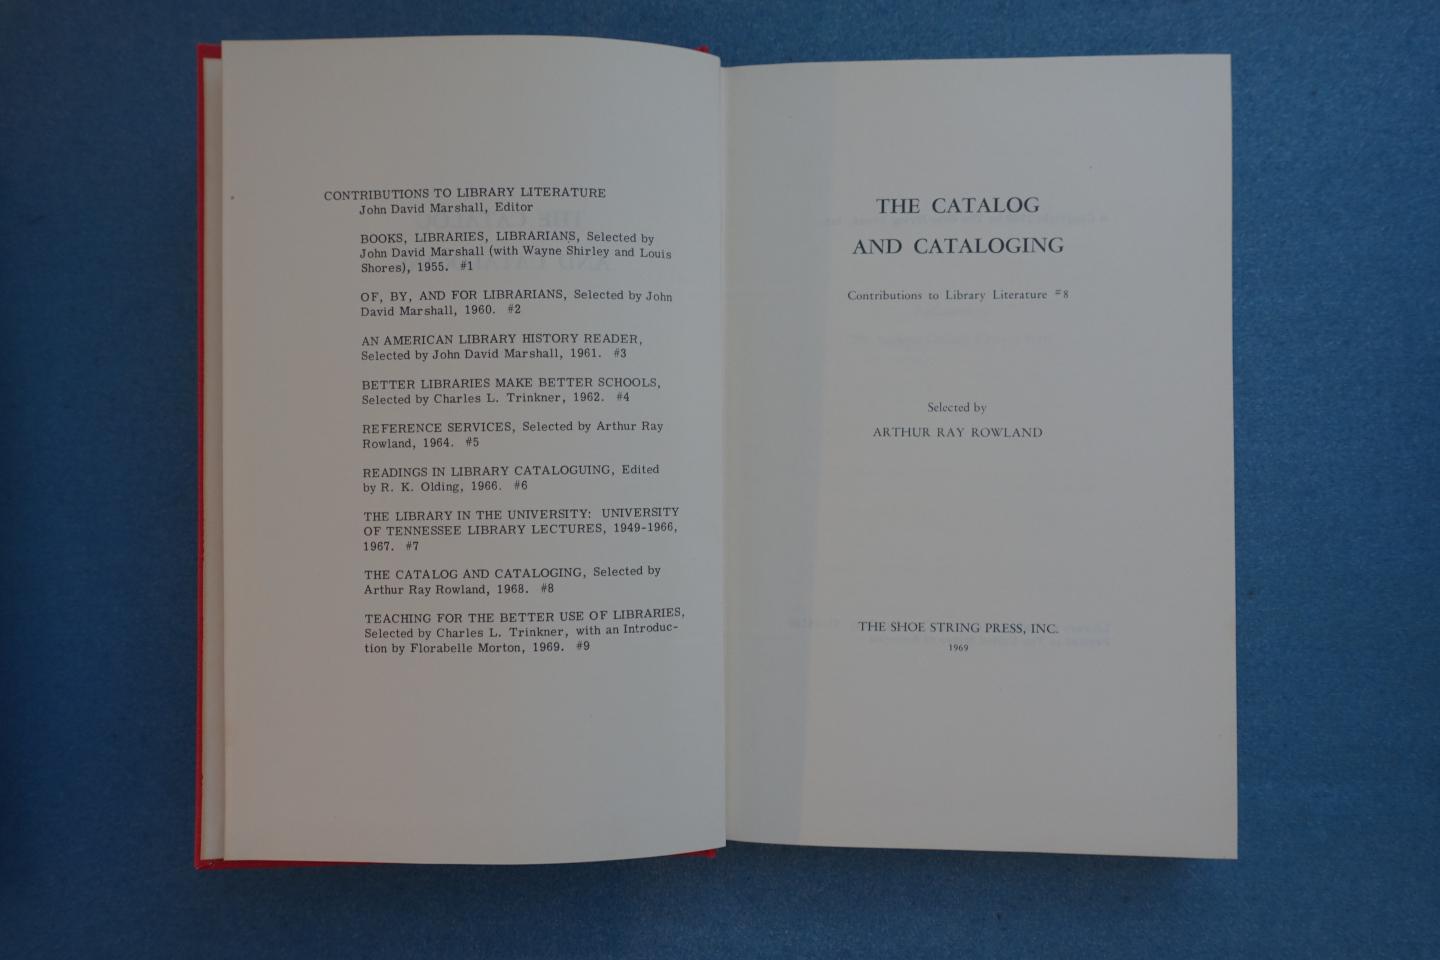 Rowland, Arthur Ray - The Catalog and Cataloging (Contributions to Library Literature 8)